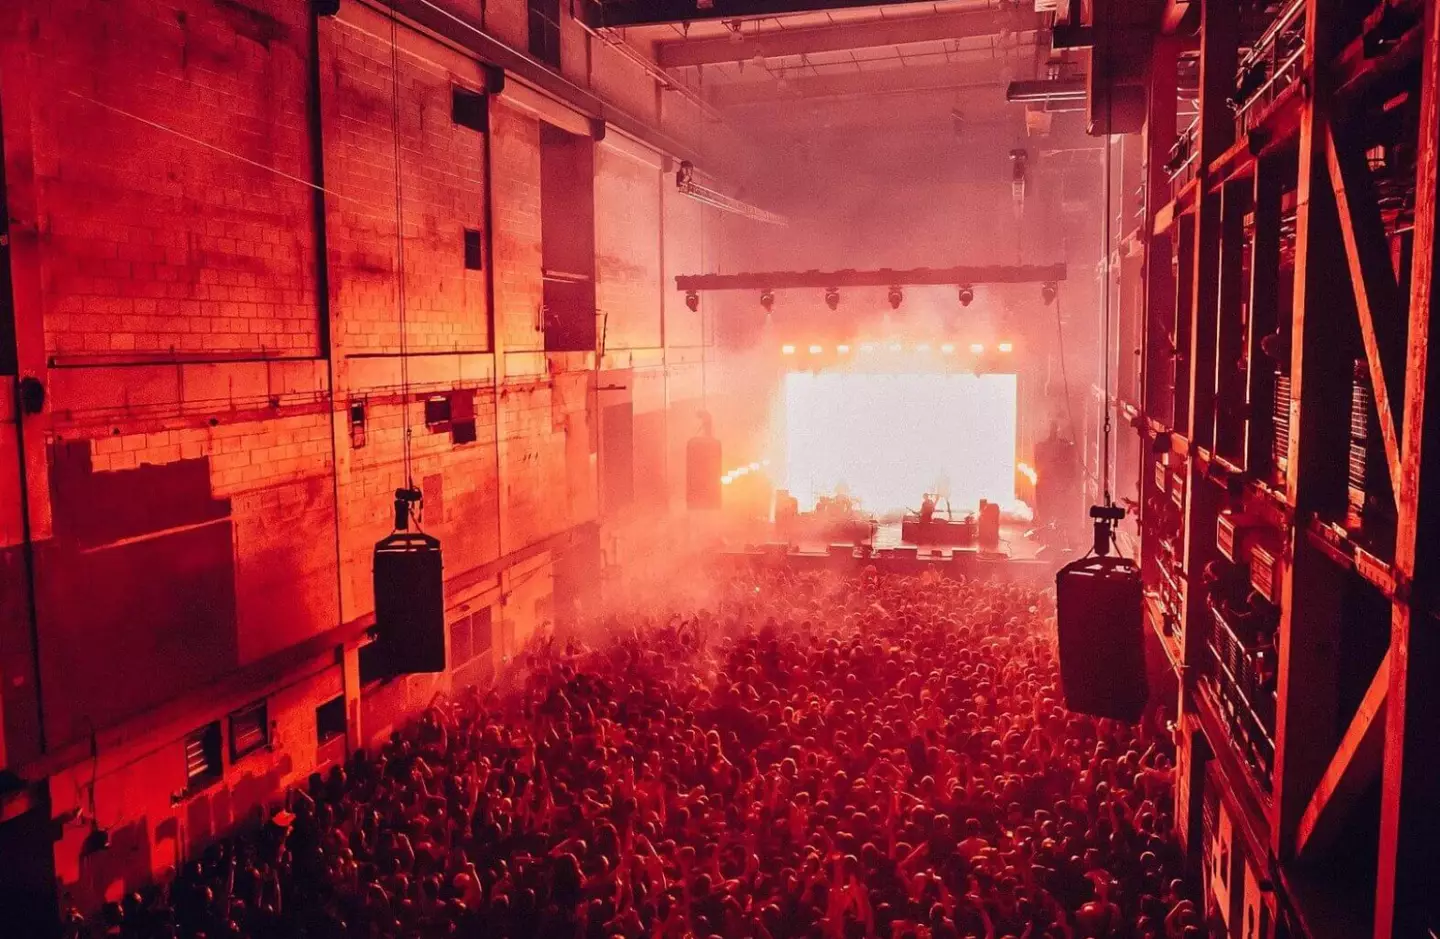 Printworks first opened its doors in January 2017.